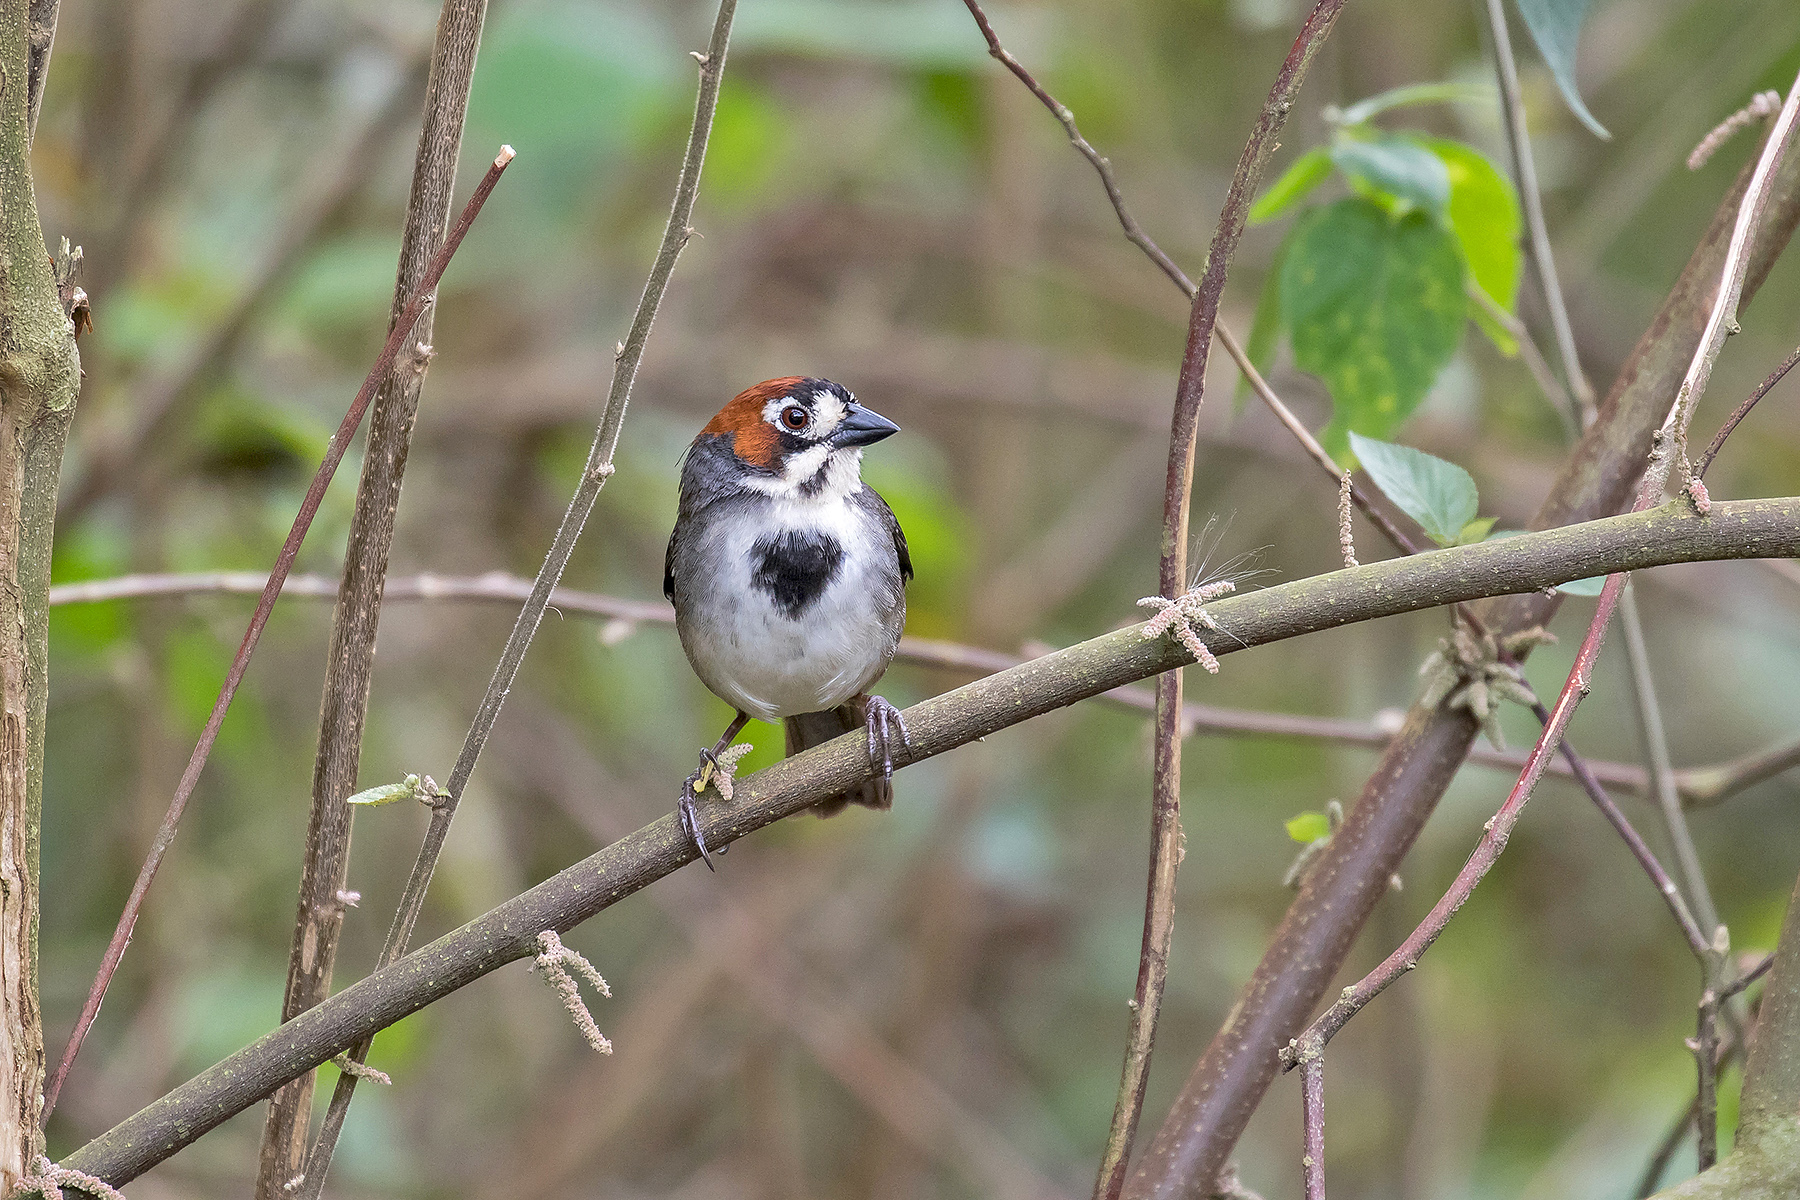 Cabanis's Ground Sparrow on our Costa Rica birding tour (image by Pete Morris)